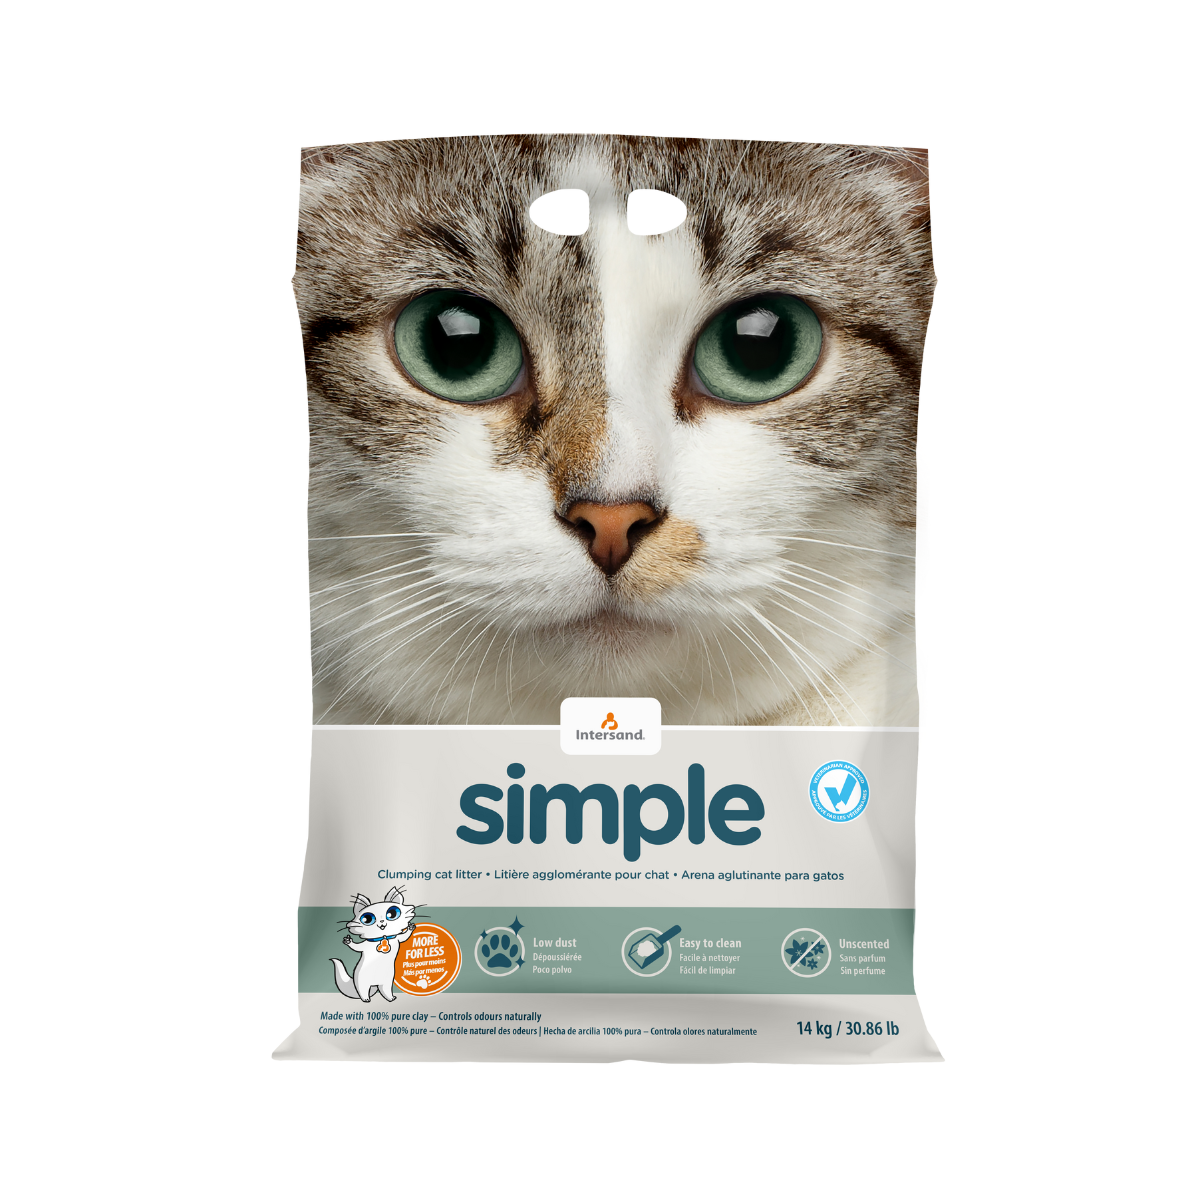 Simple value clumping litter